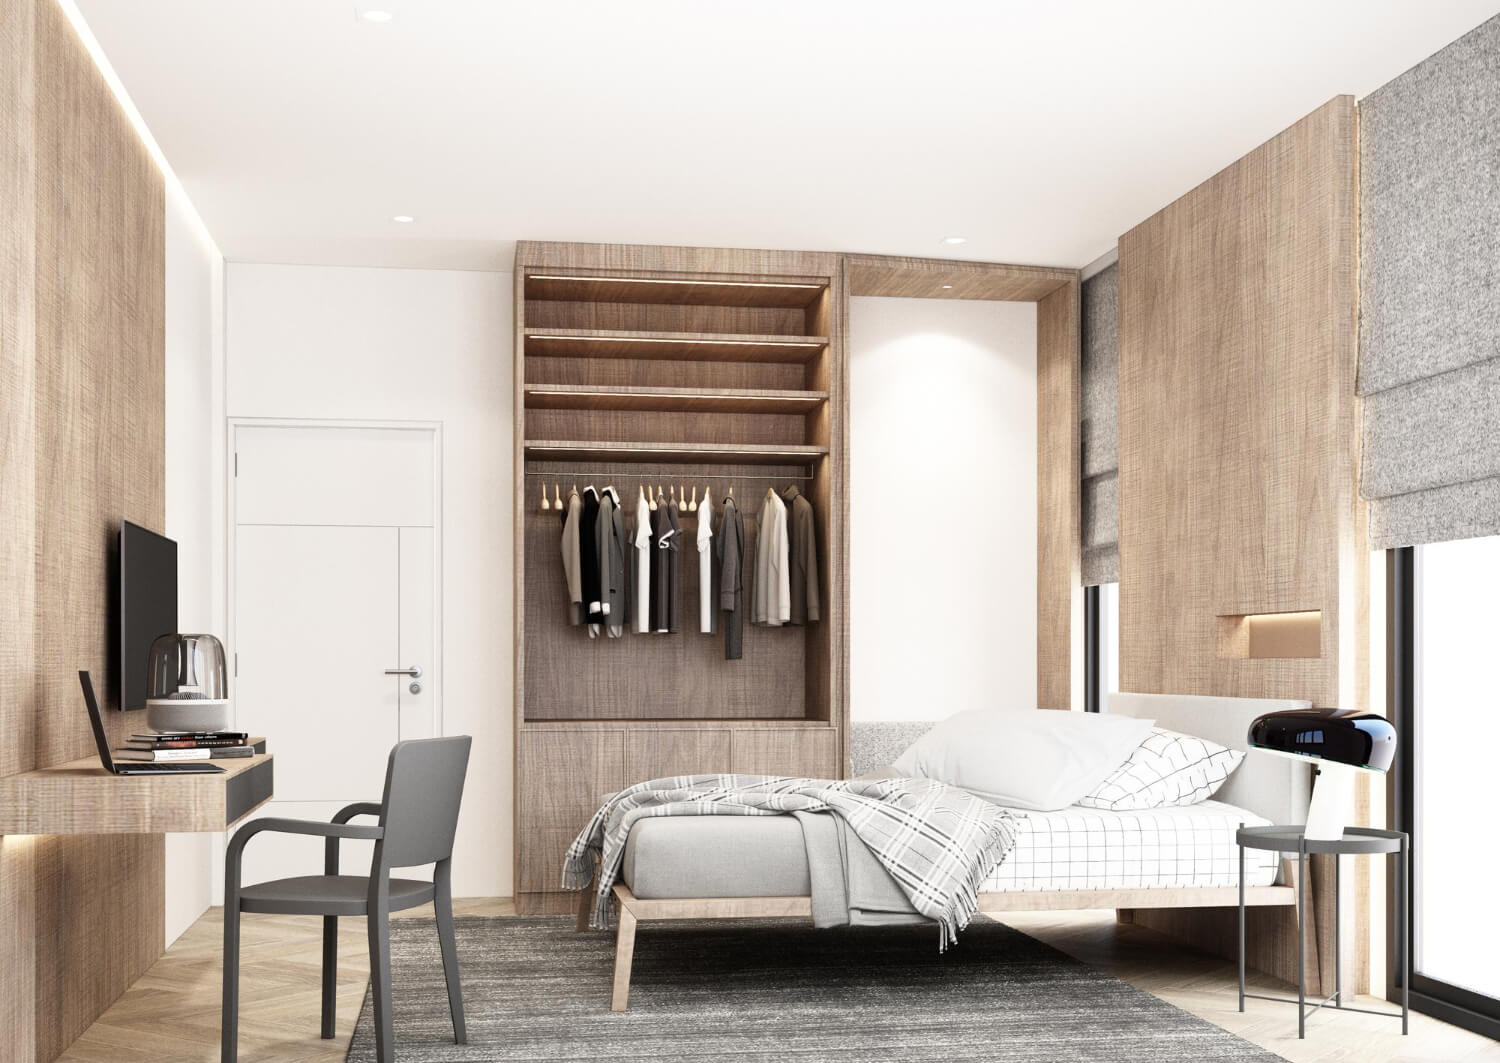 bedroom-designed-minimalist-style-with-bed-bedside-table-walls-are-decorated-with-wooden-materials-parquet-floors-wooden-blinds-with-many-decorations-wardrobe-3d-render (1)